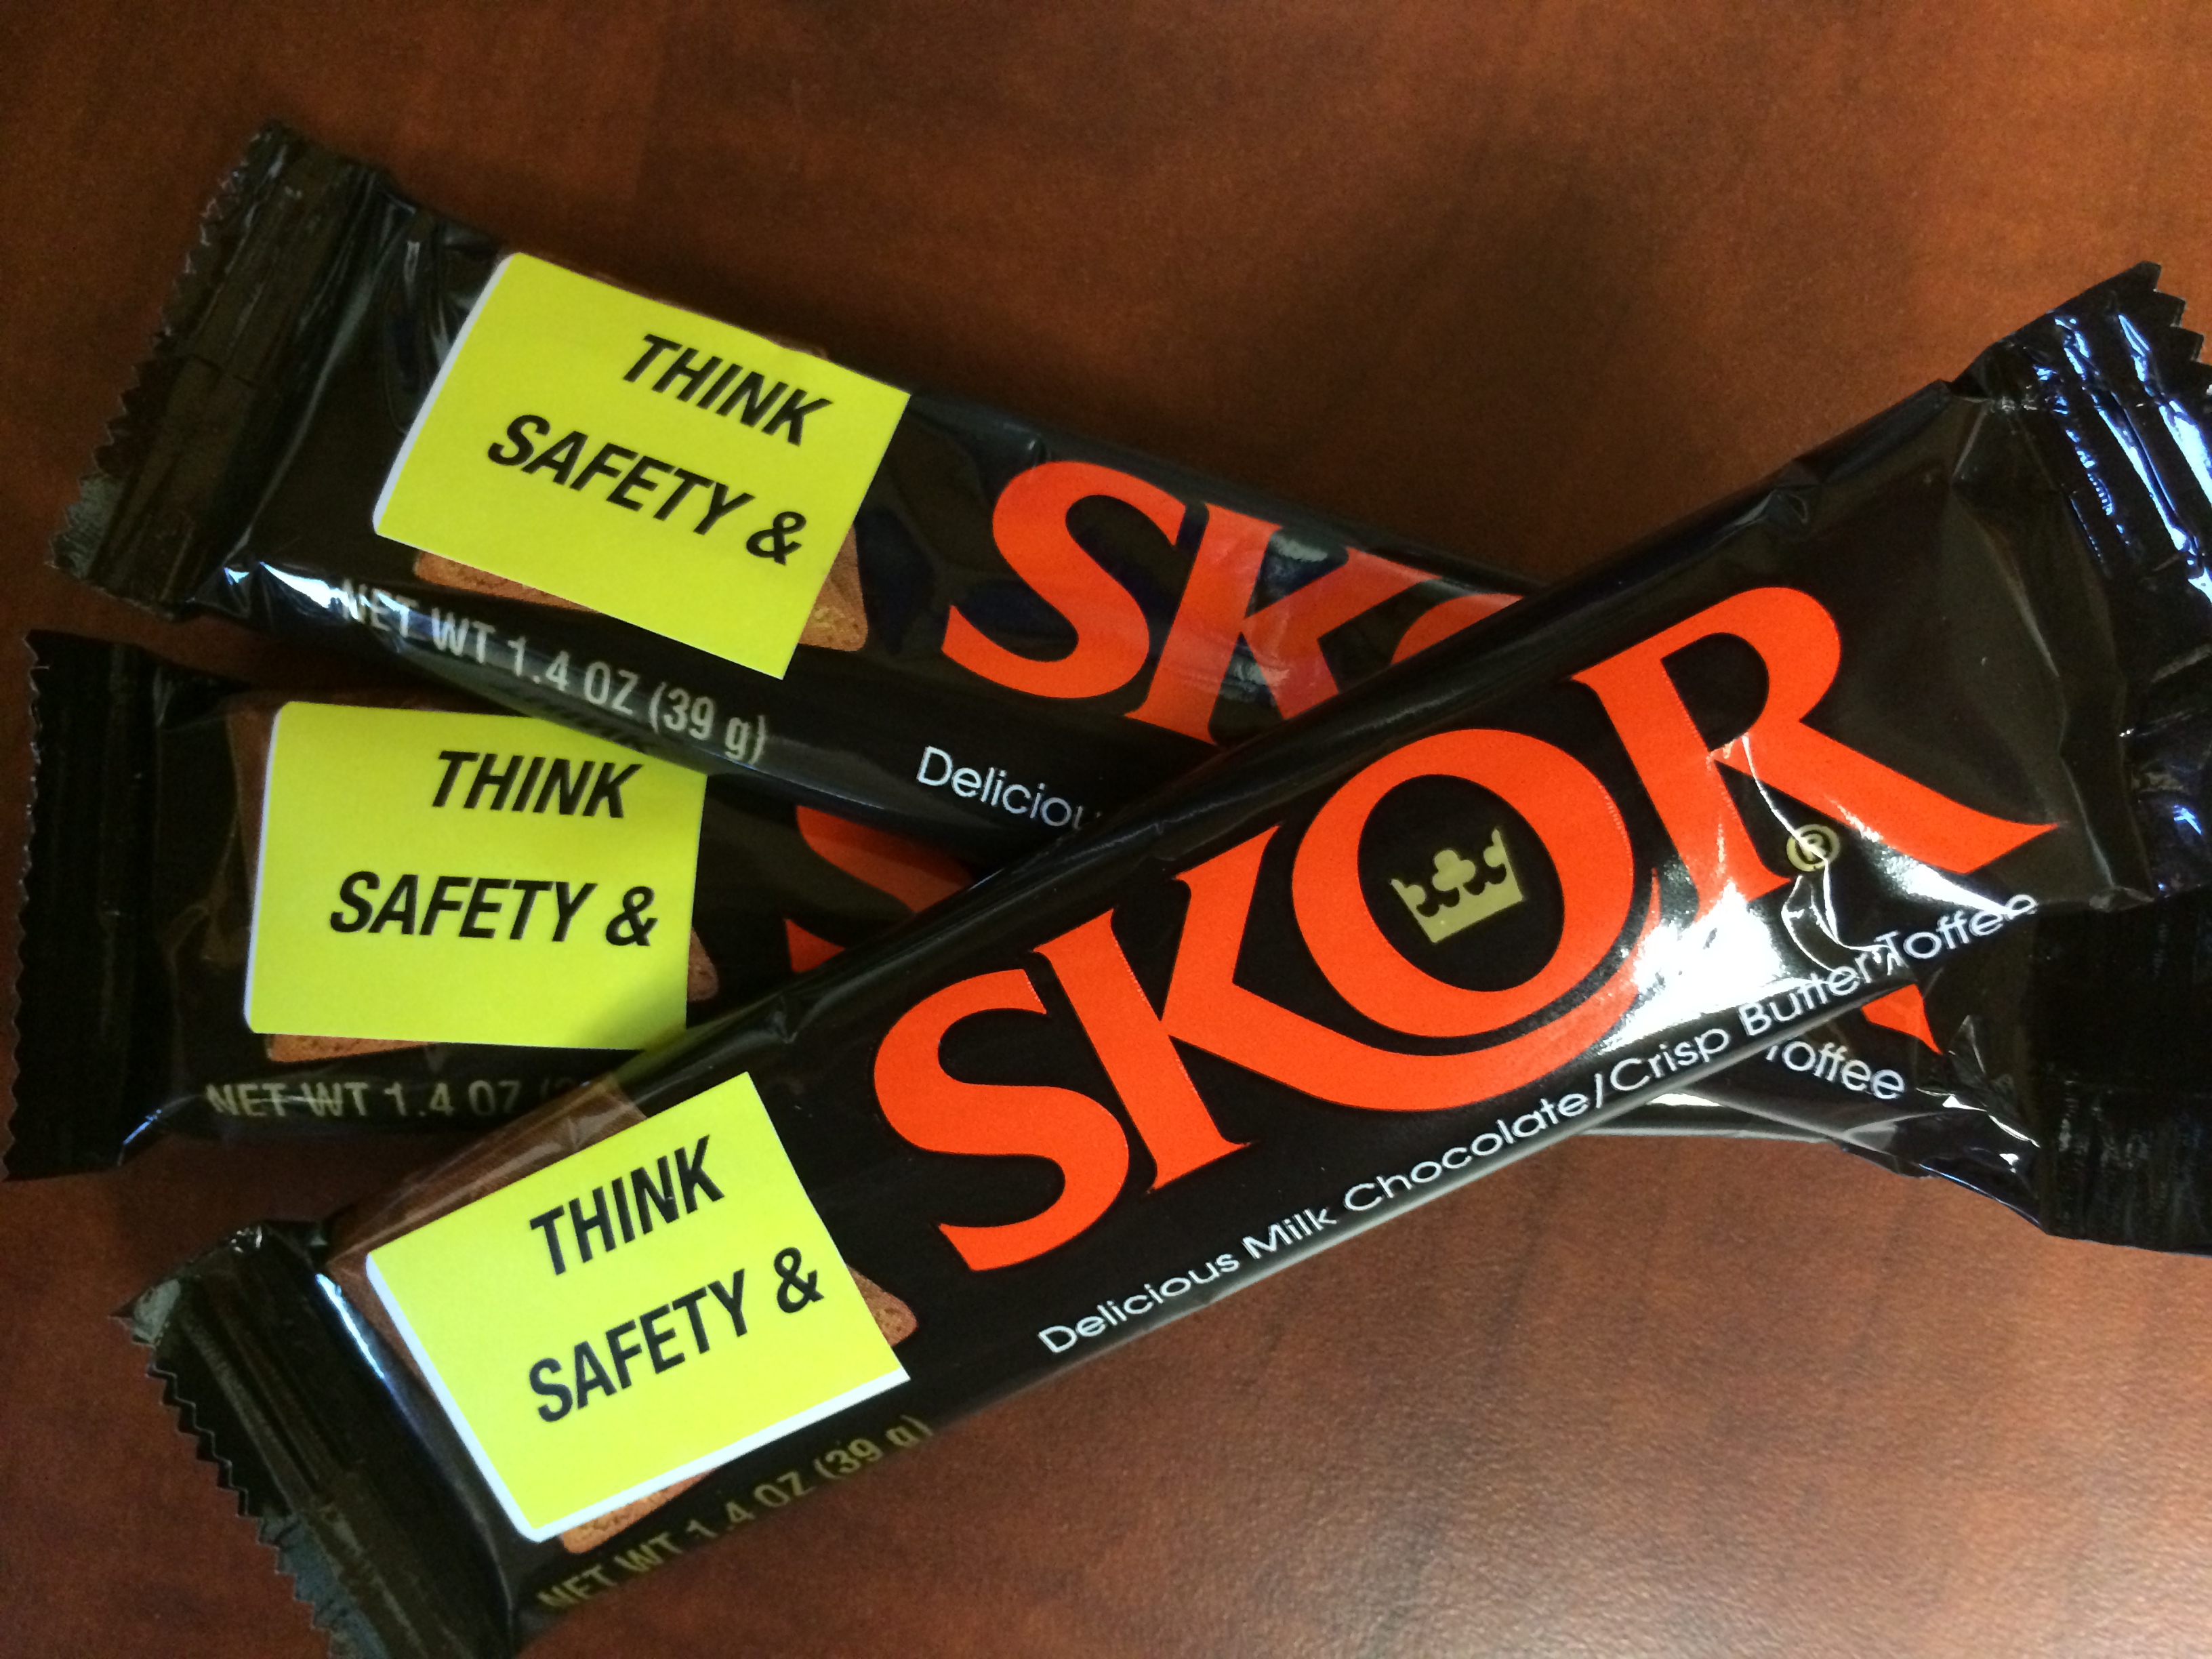 Think Safety & SKOR - June is Workplace Safety Month